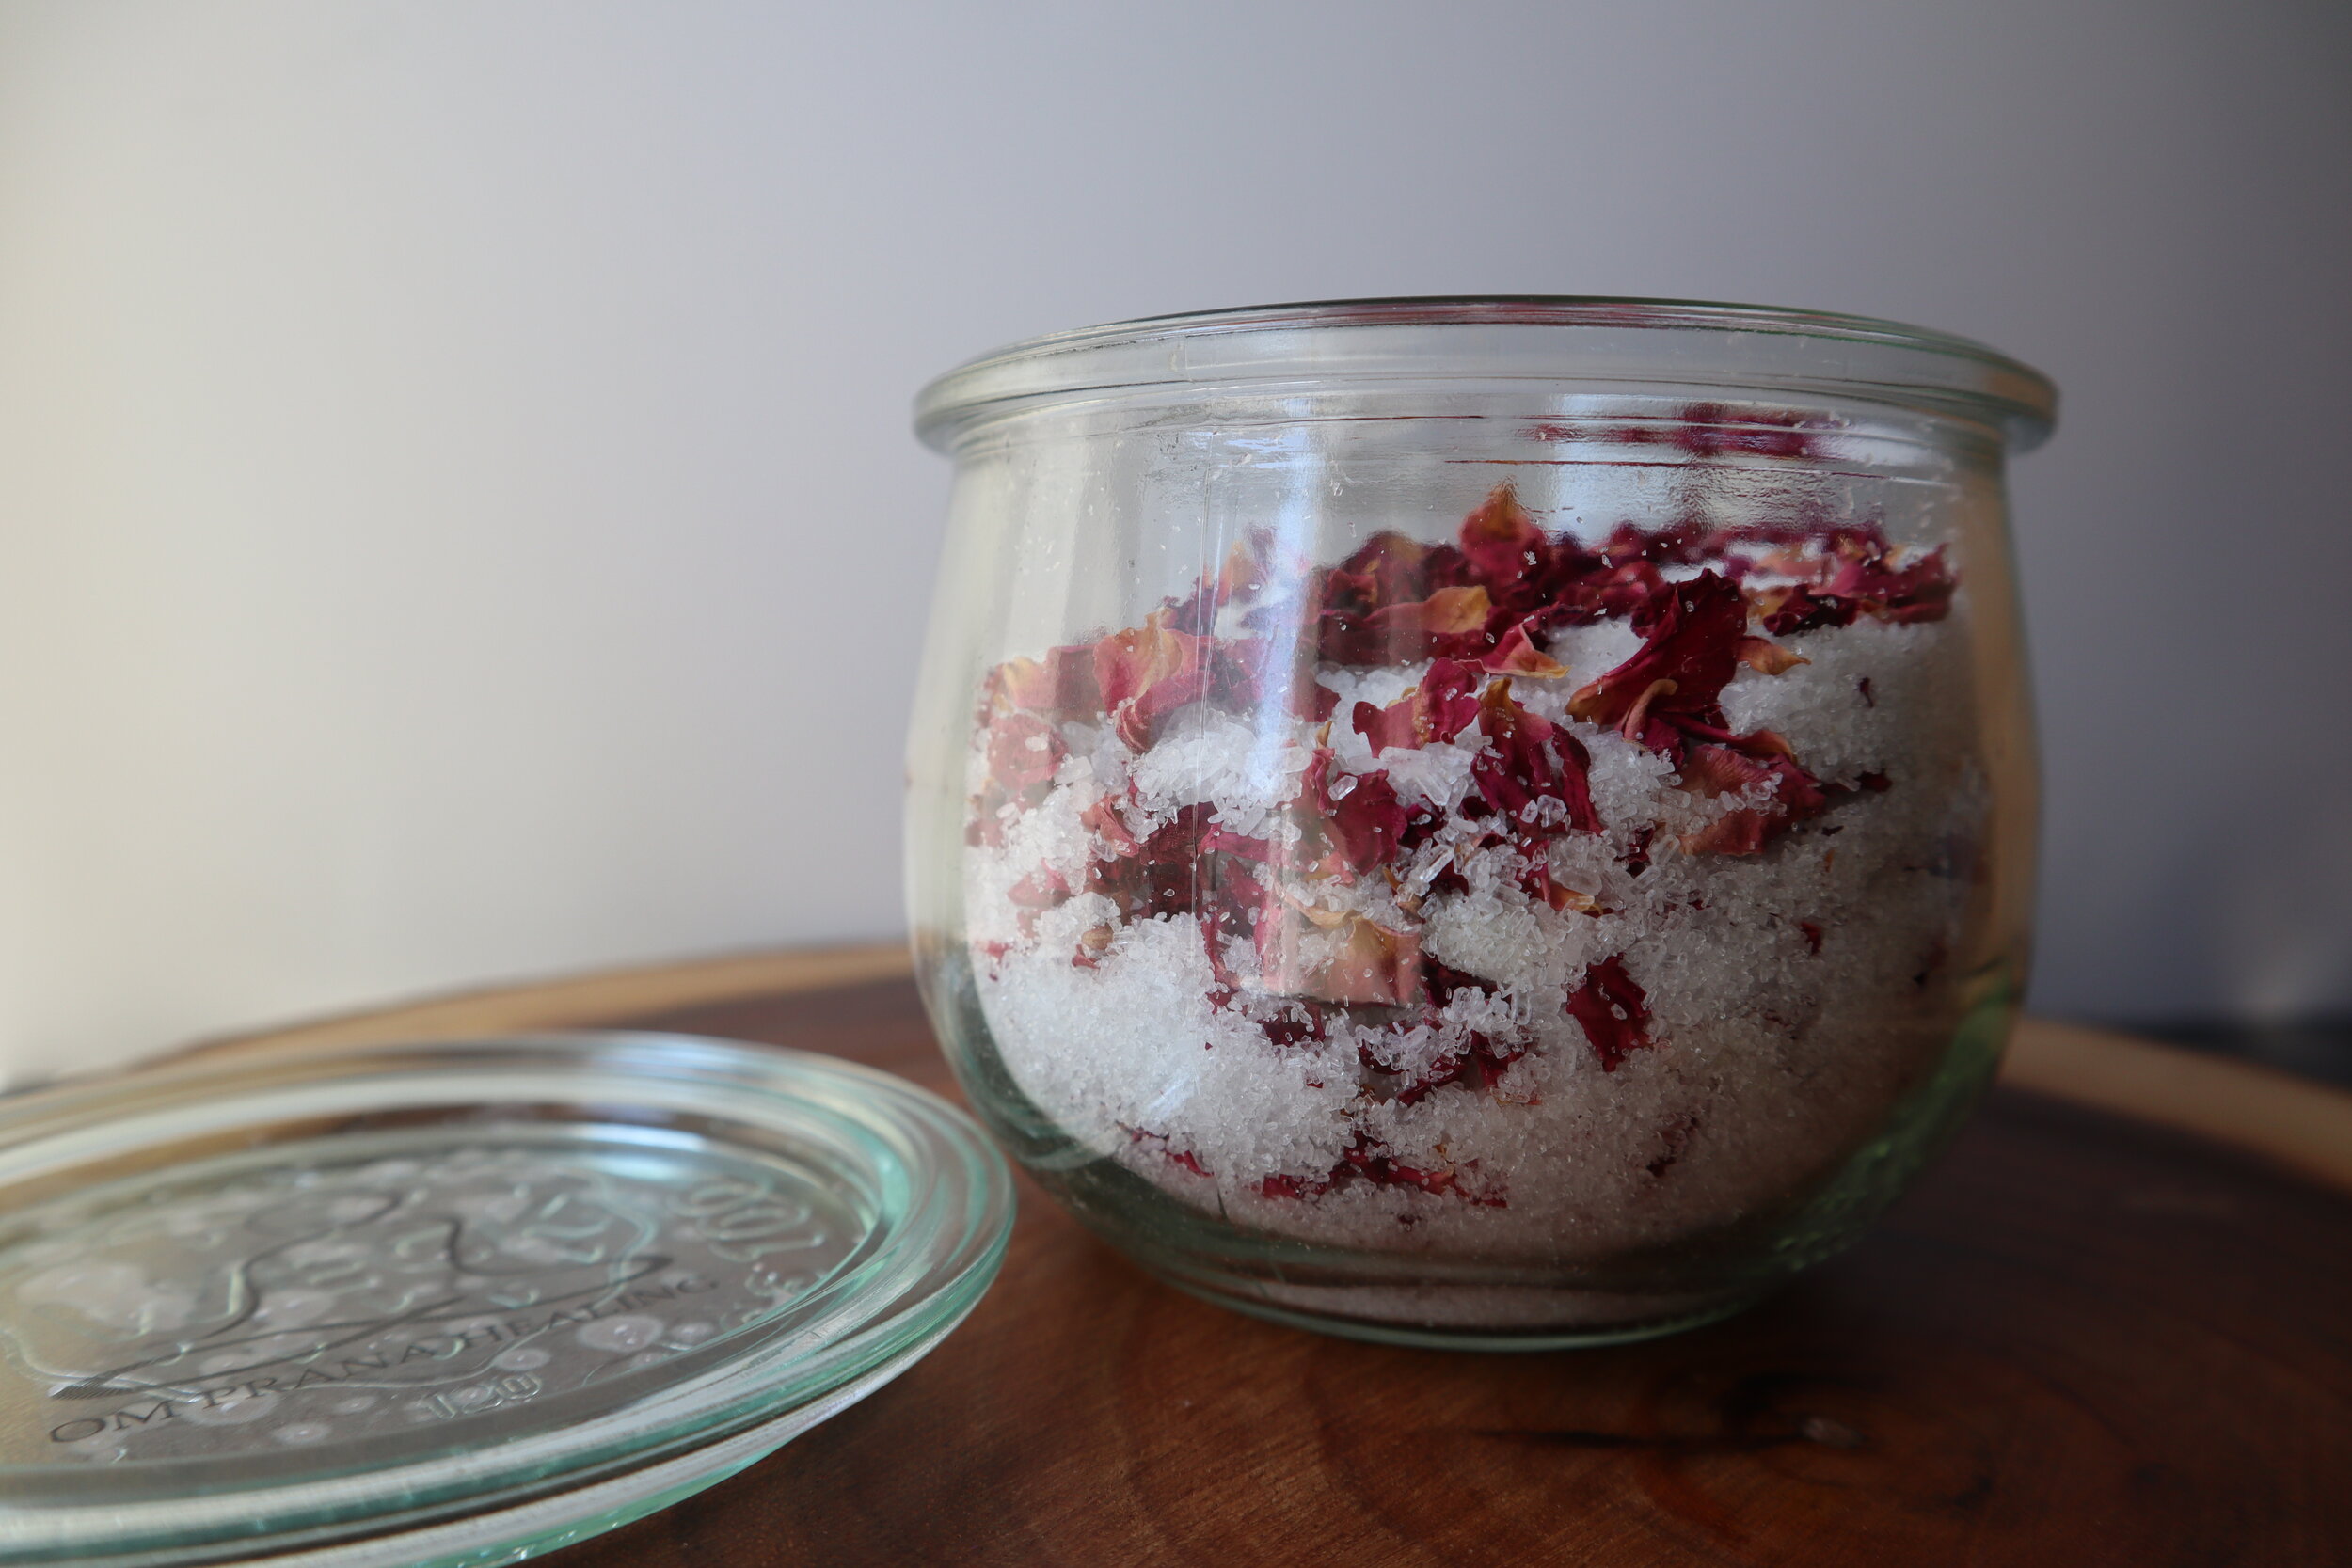 Bath Salts With Rose Petals for Relaxation – Rosaholics